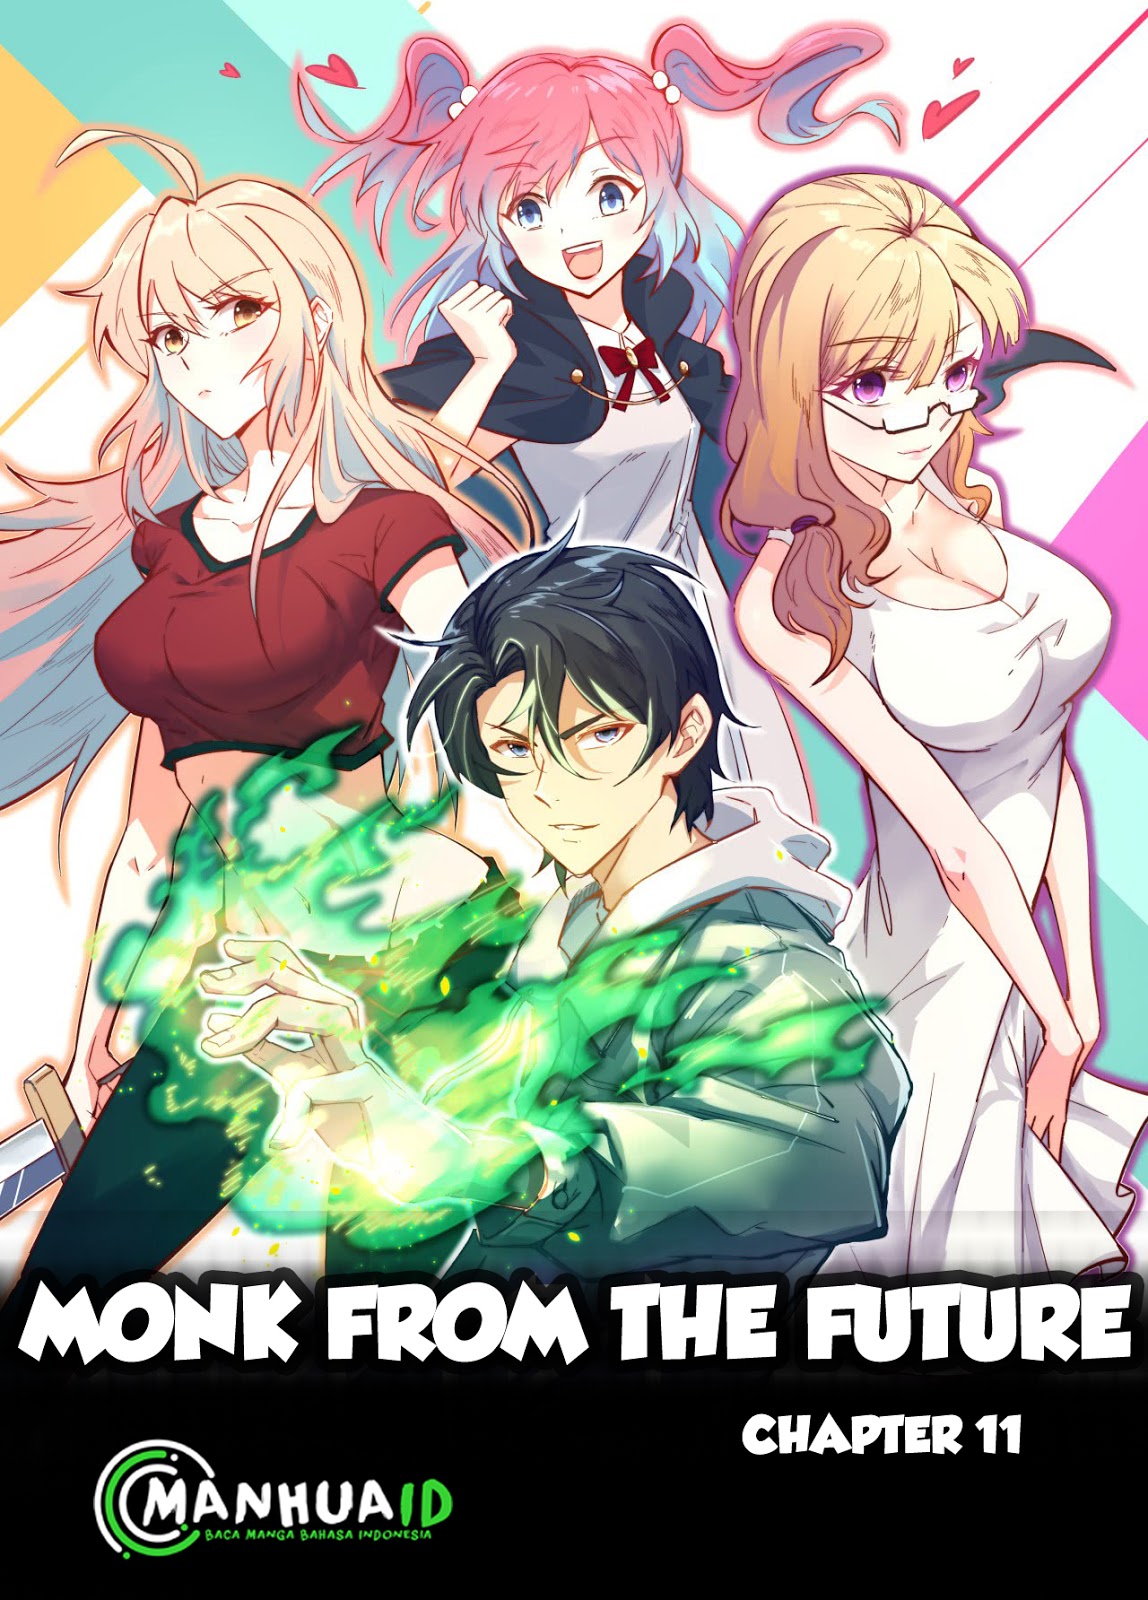 Monk From the Future Chapter 11